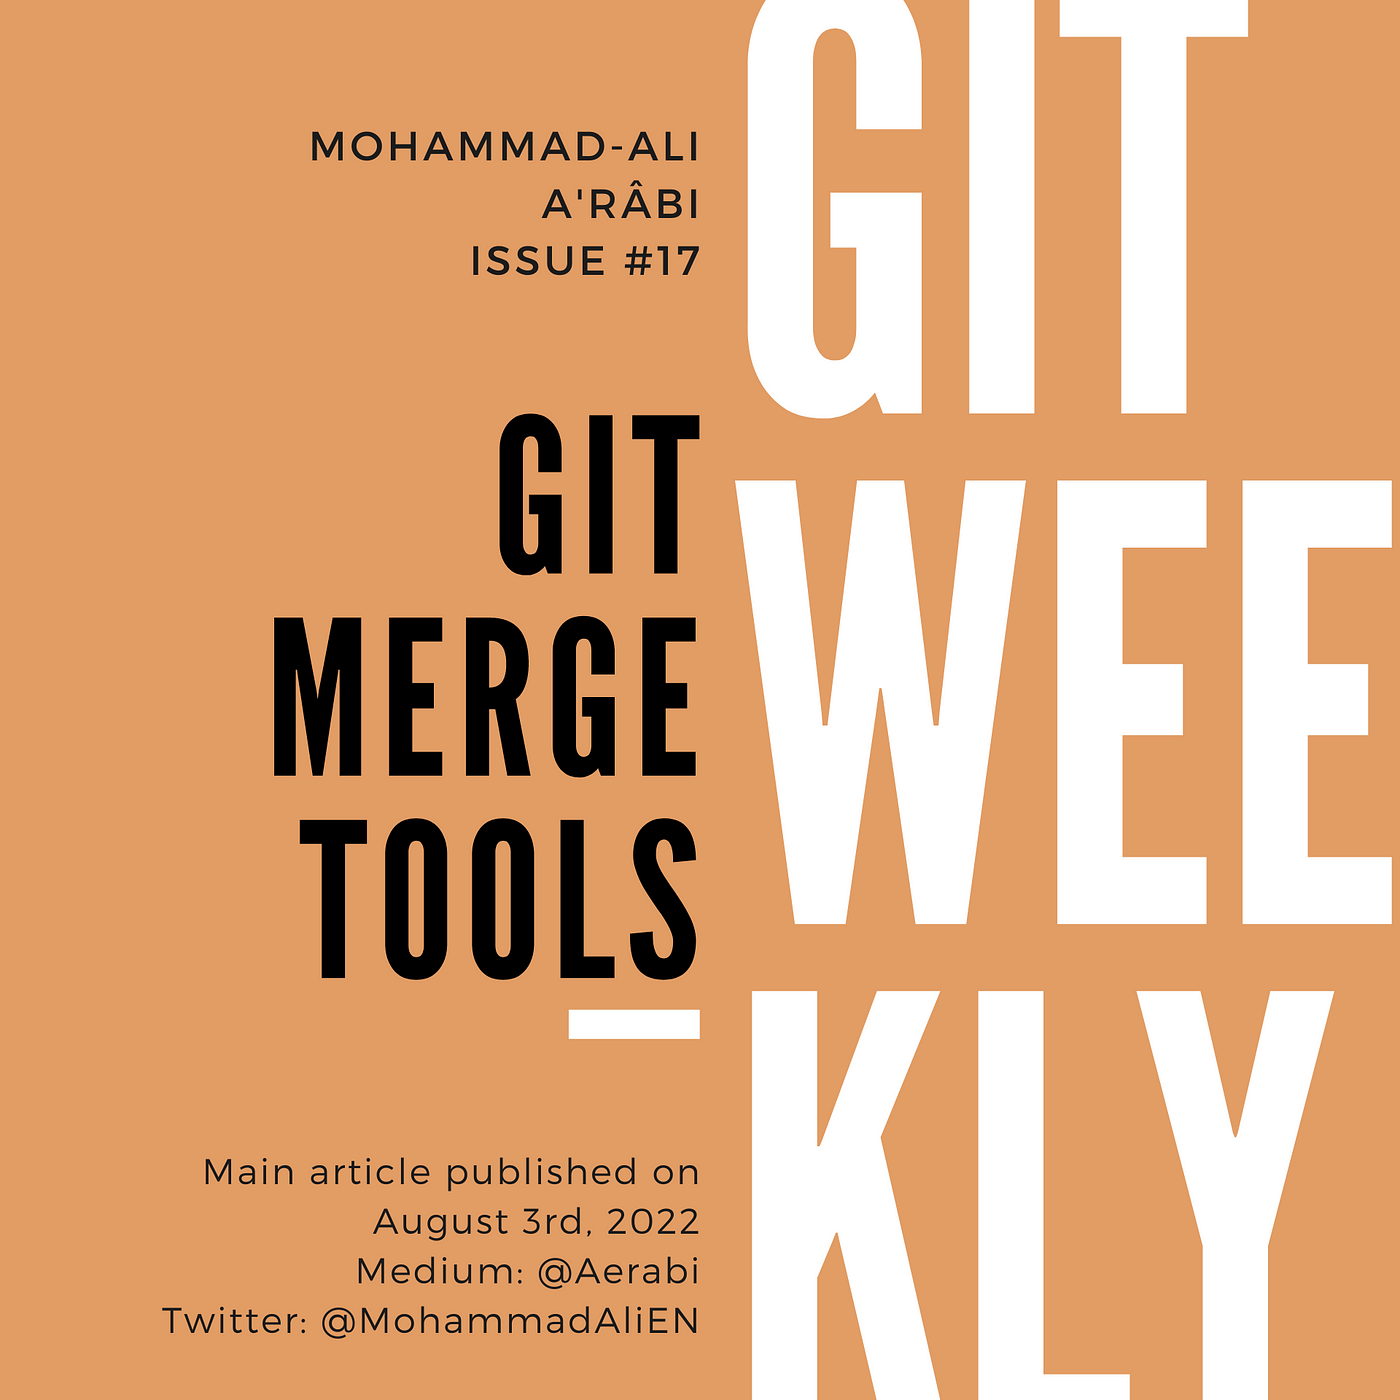 Git Merge Tools. How to resolve conflicts using Git? | by Mohammad-Ali  A'RÂBI | ITNEXT